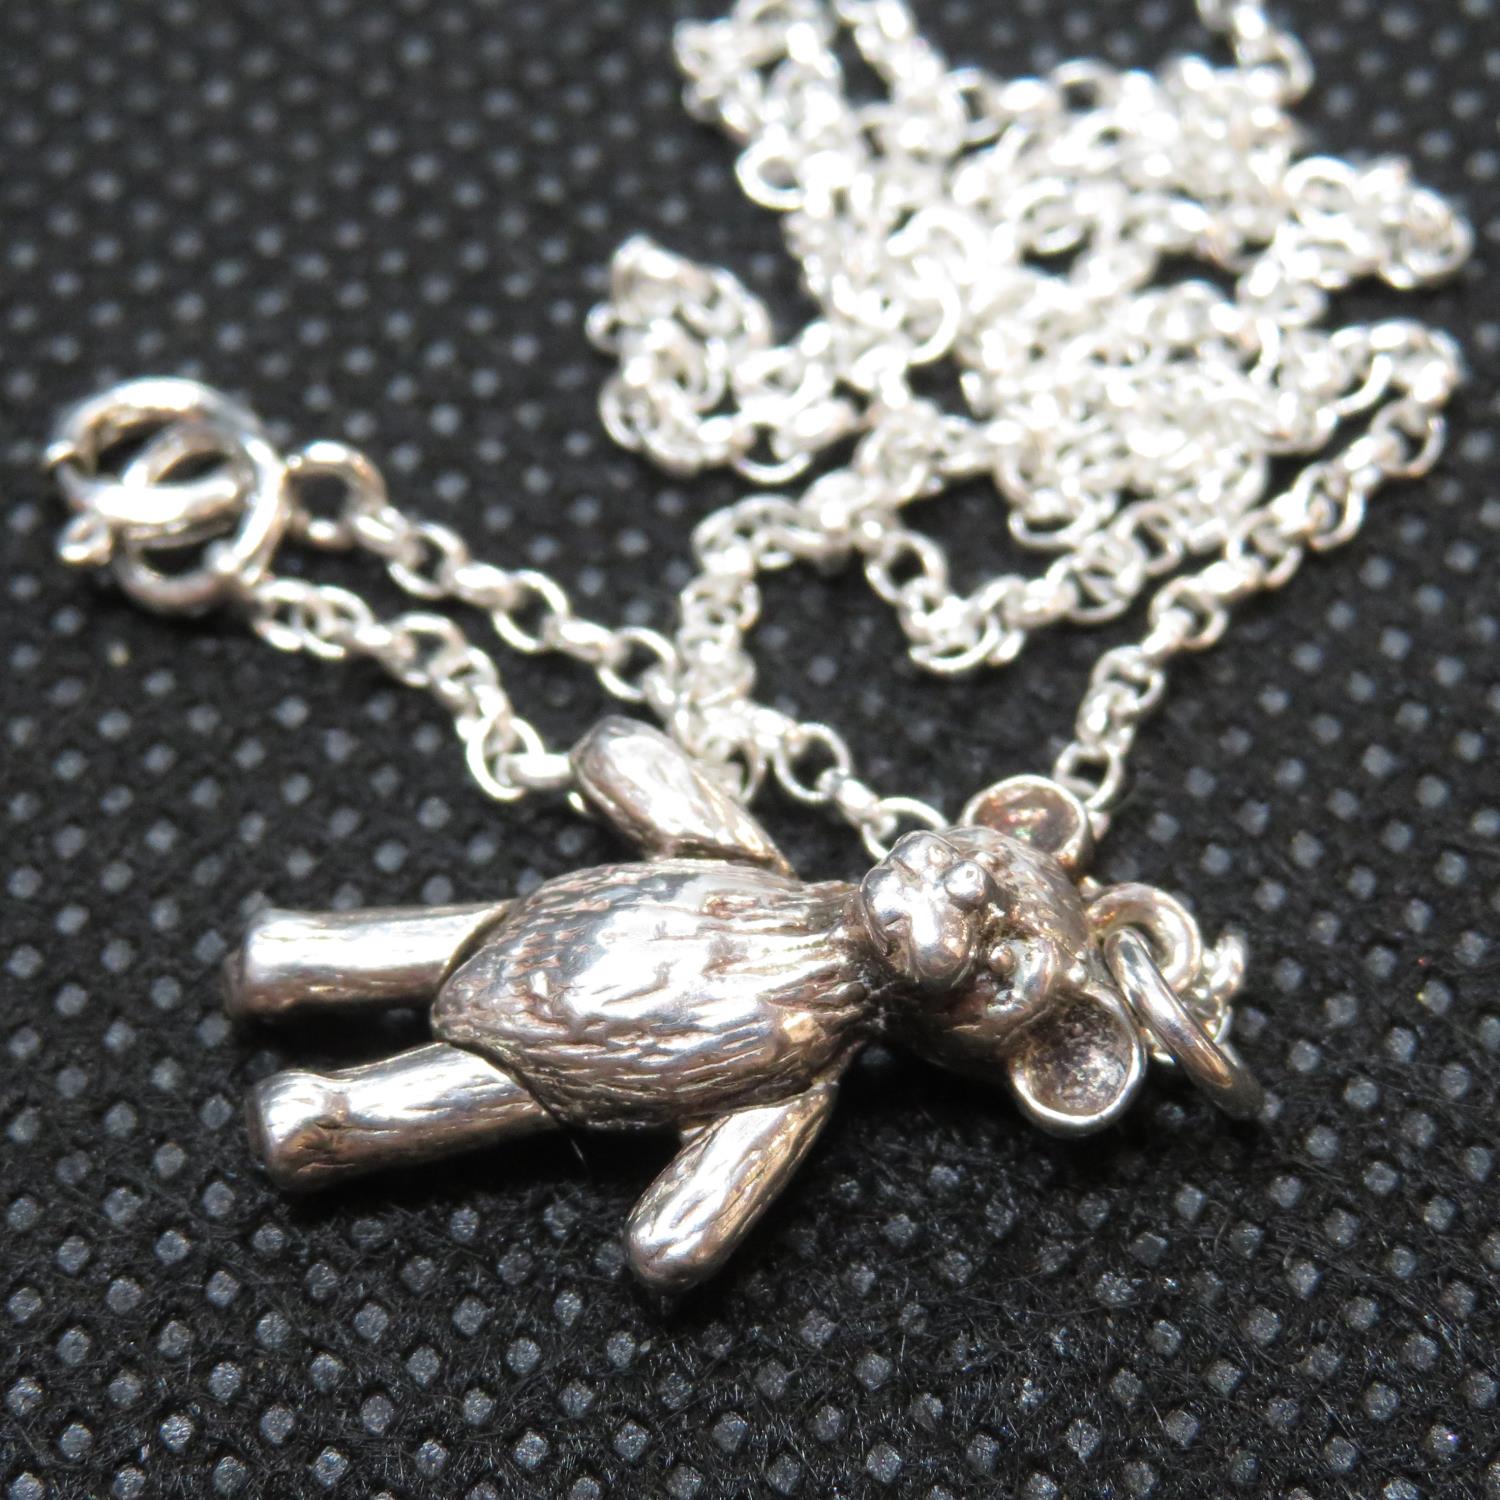 Vintage silver teddy bear pendant with articulated legs on 16" silver oval belcher chain - Image 2 of 3